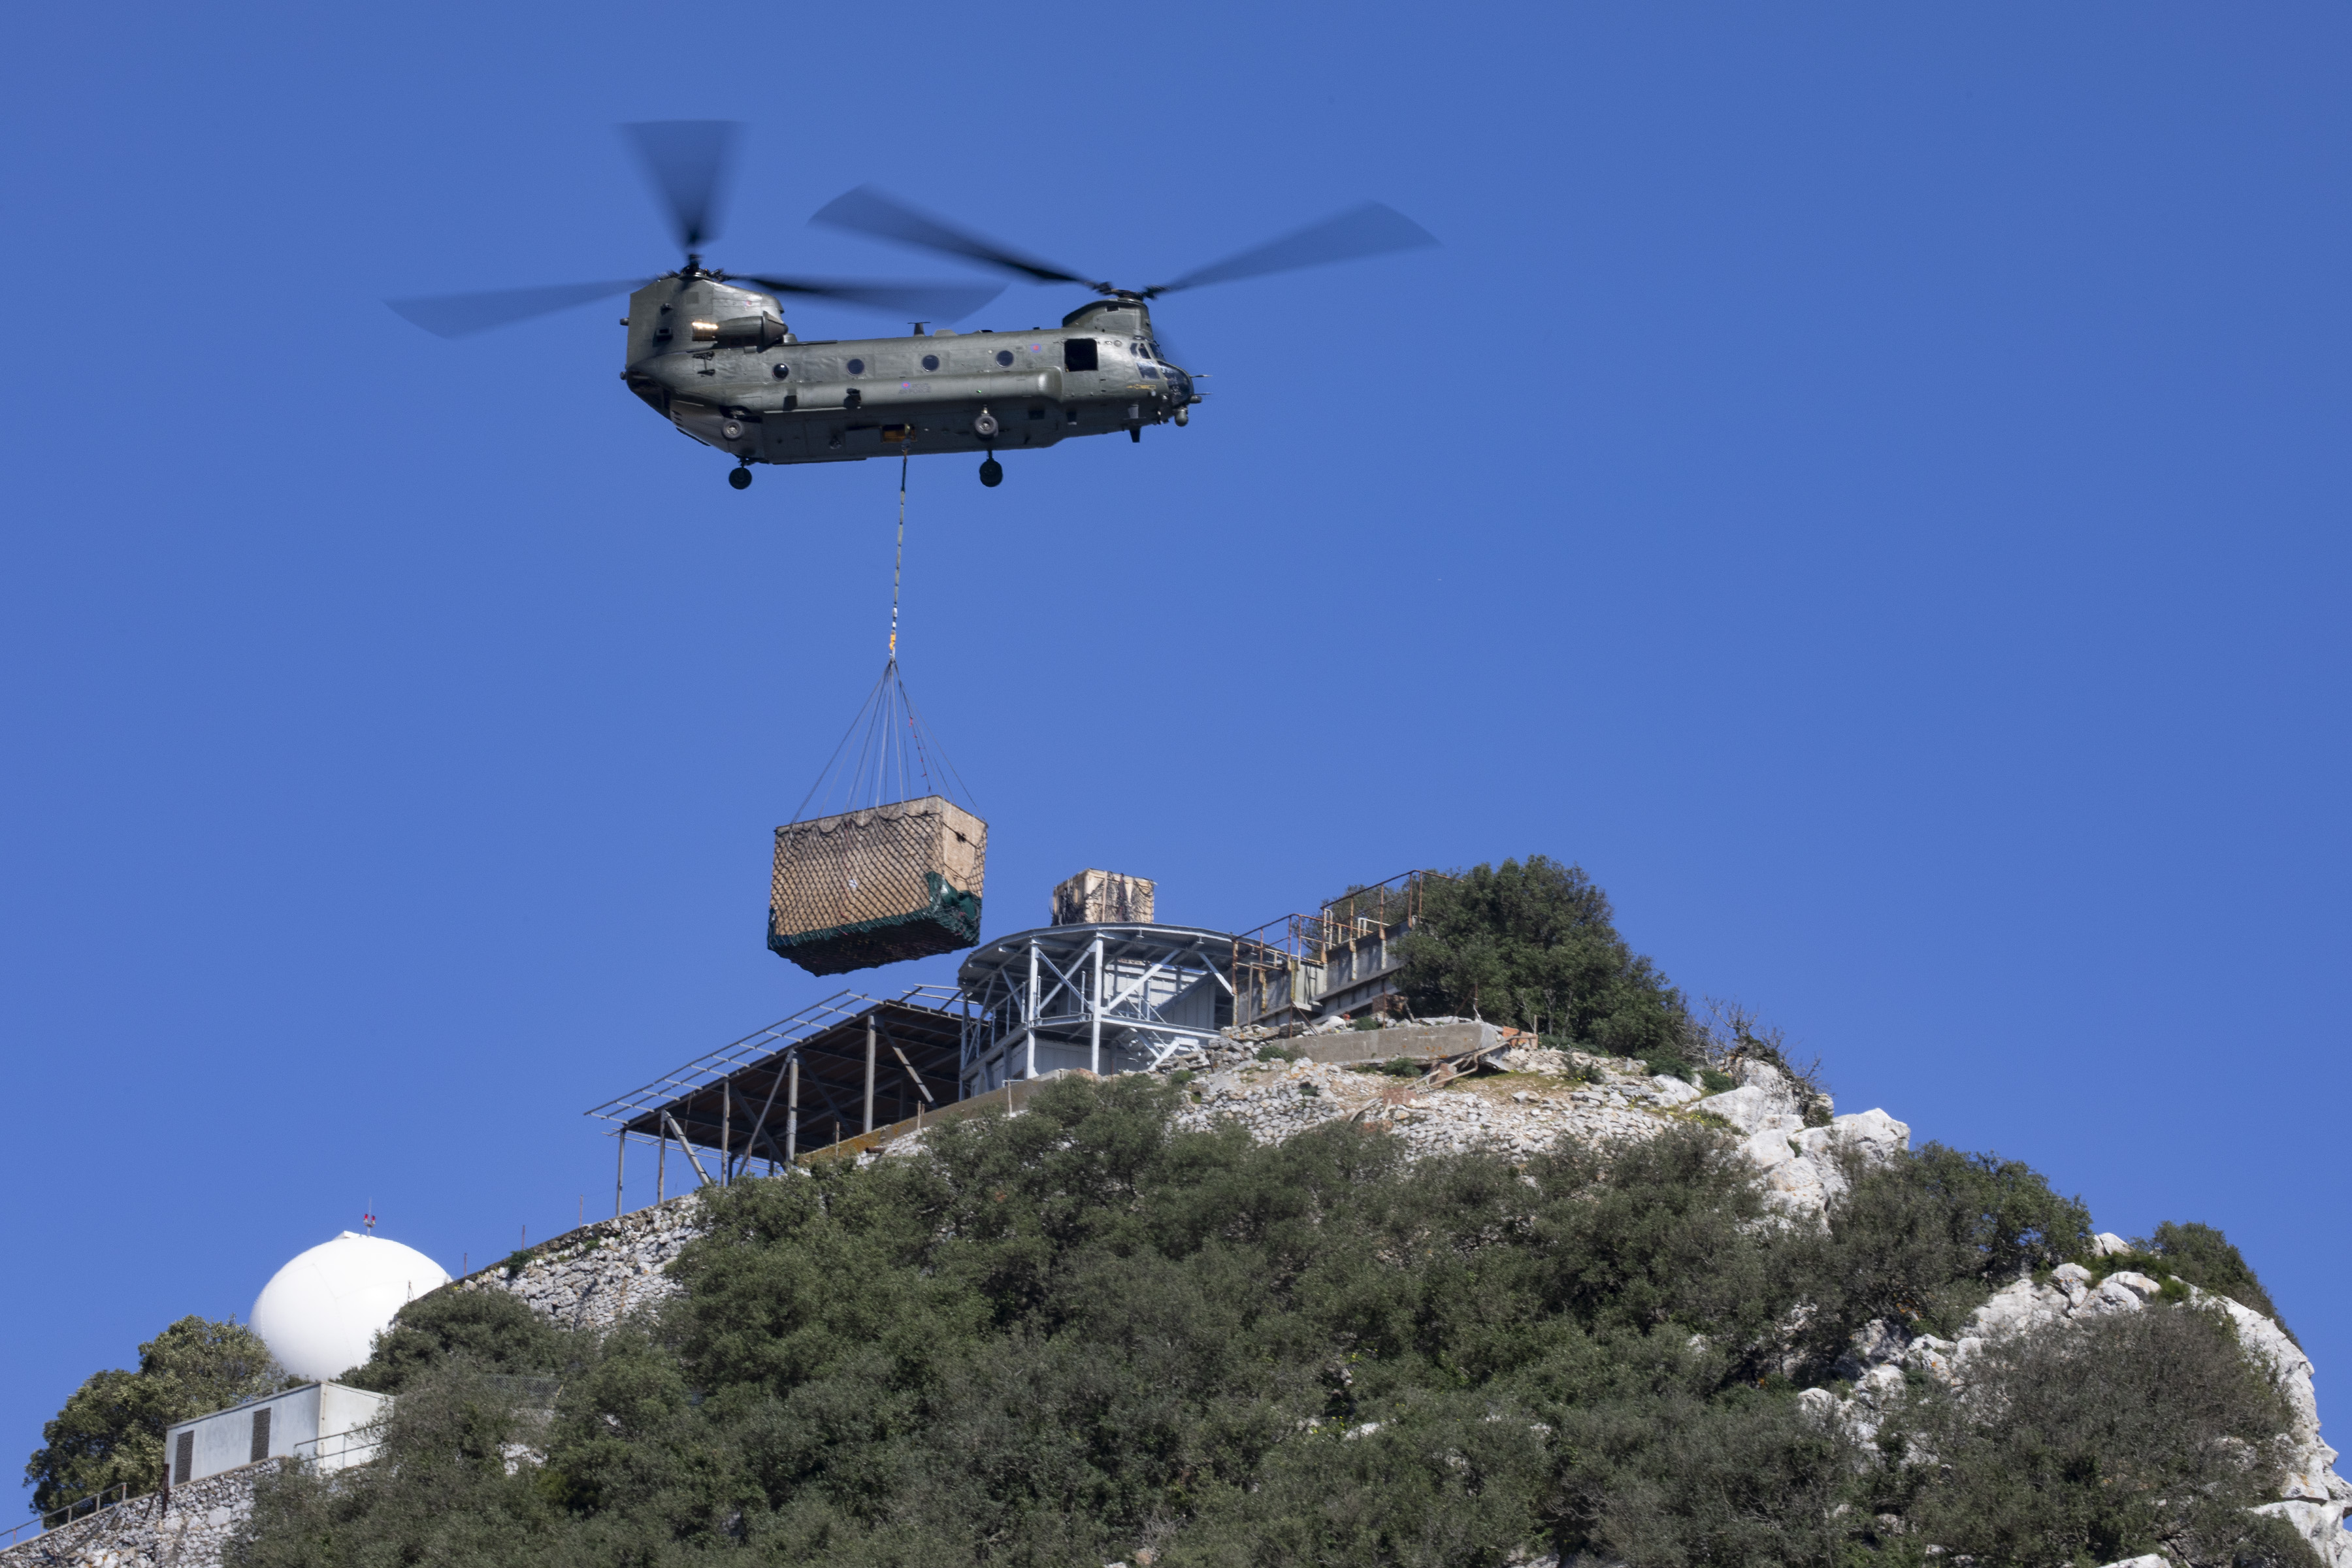 Chinook delivers cargo to the Rock of Gibraltar.